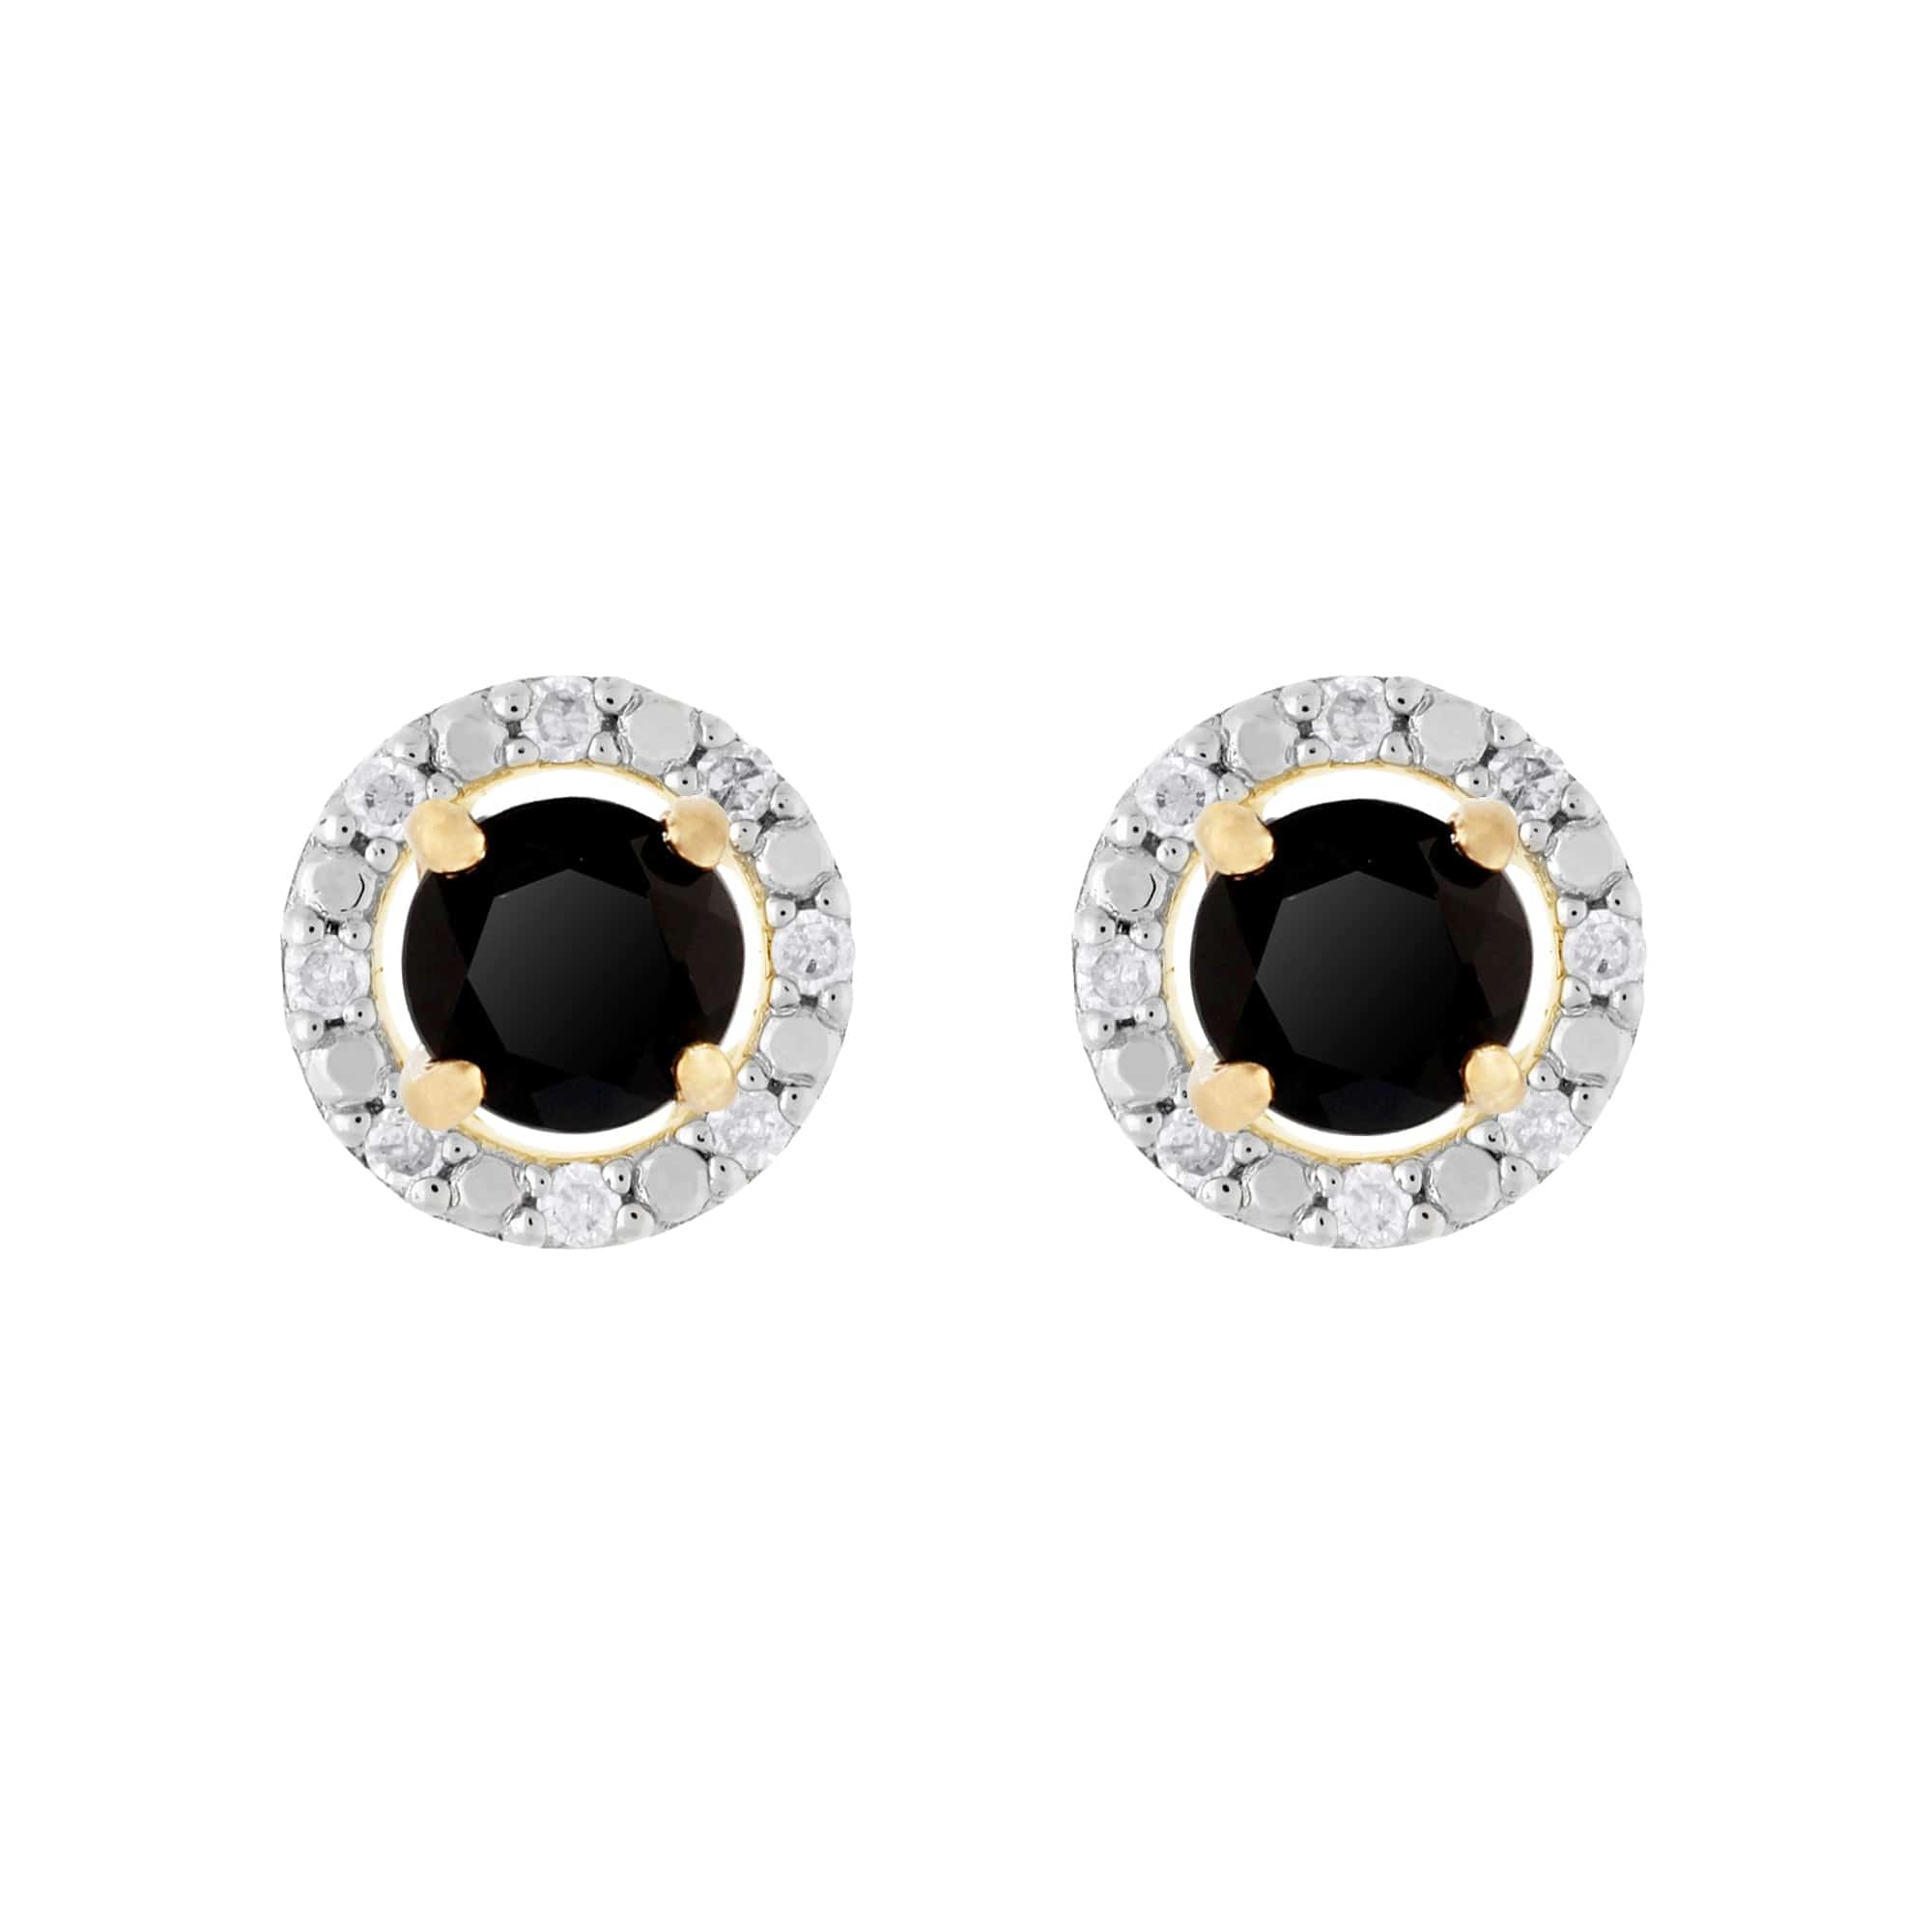 183E0083339-191E0376019 Classic Round Black Onyx Stud Earrings with Detachable Diamond Round Earrings Jacket Set in 9ct Yellow Gold 1